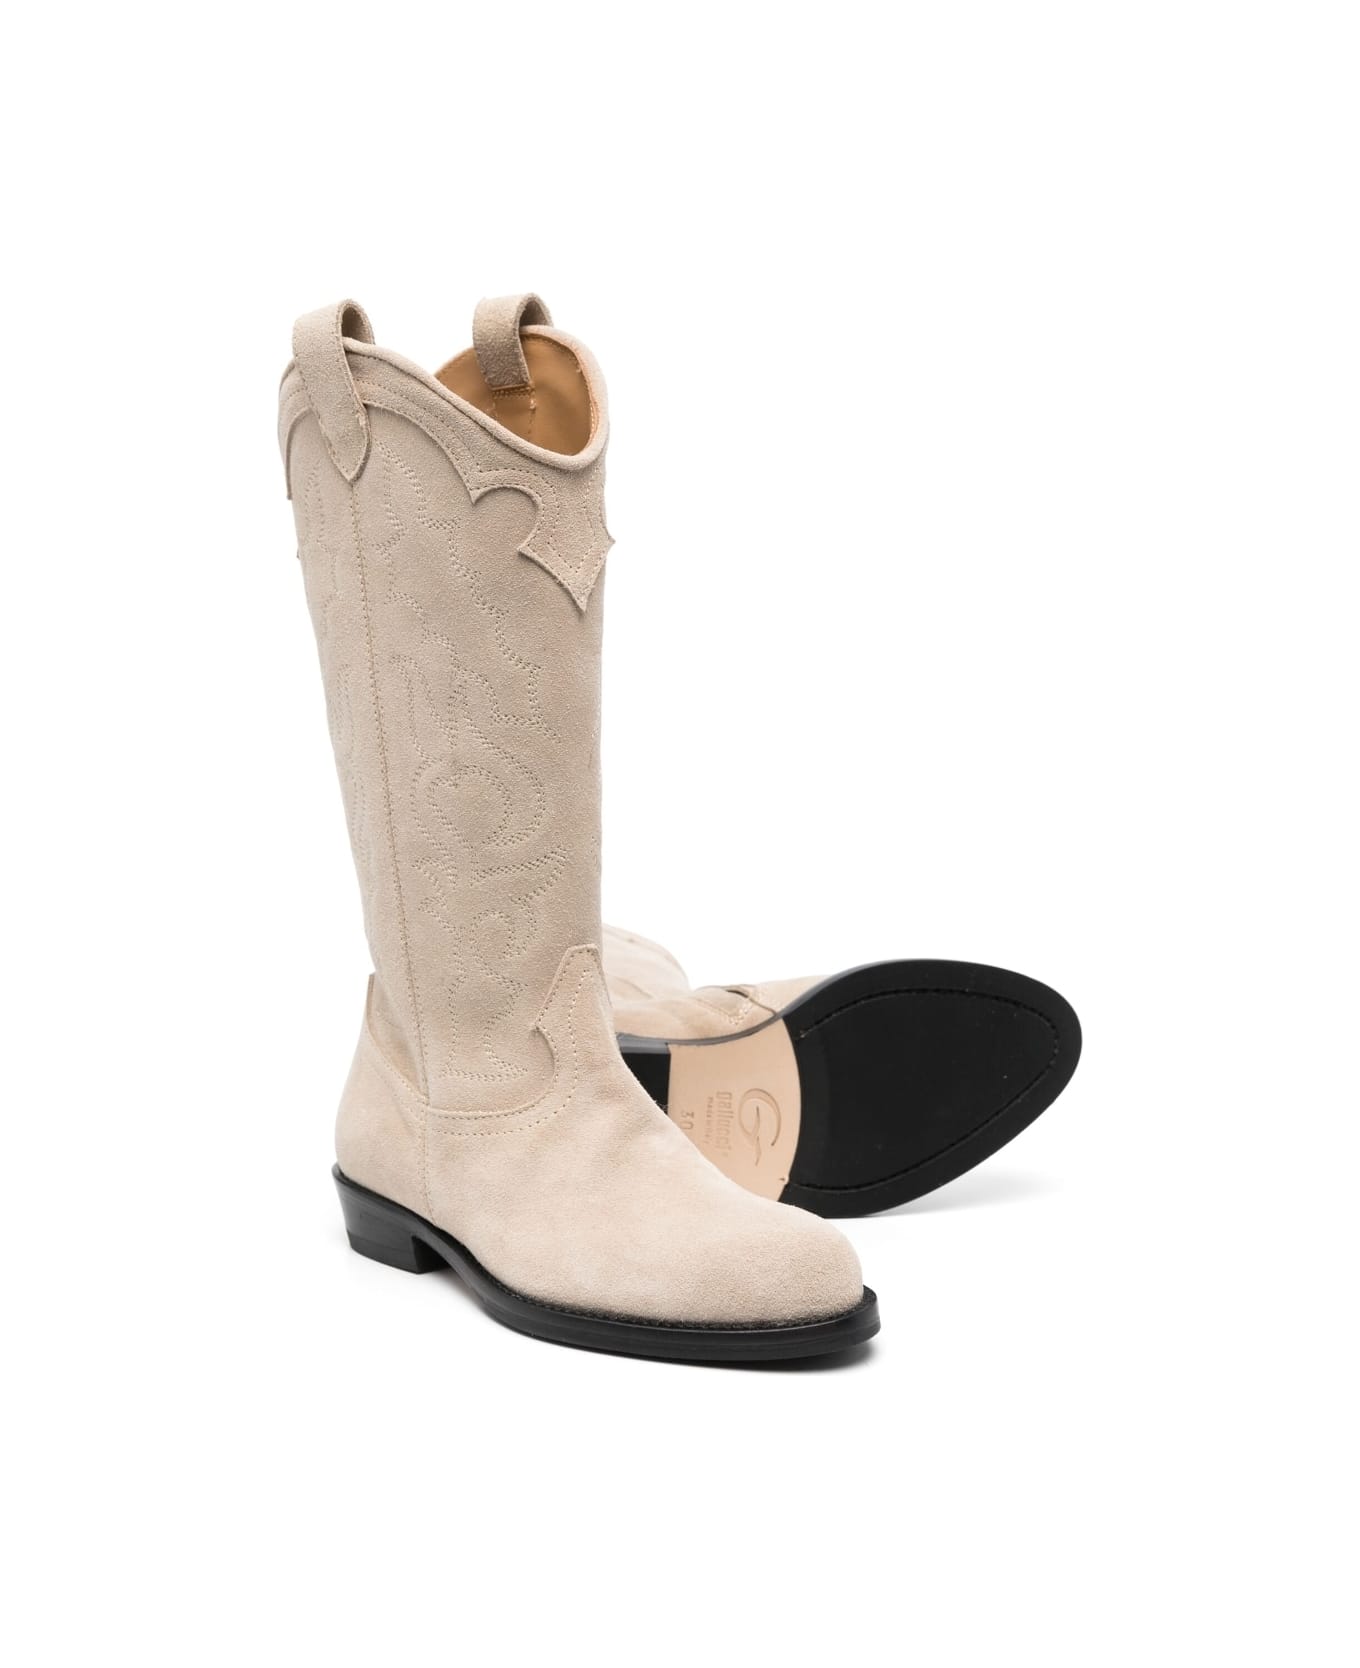 Gallucci Leather Cowboy Boots - Beige